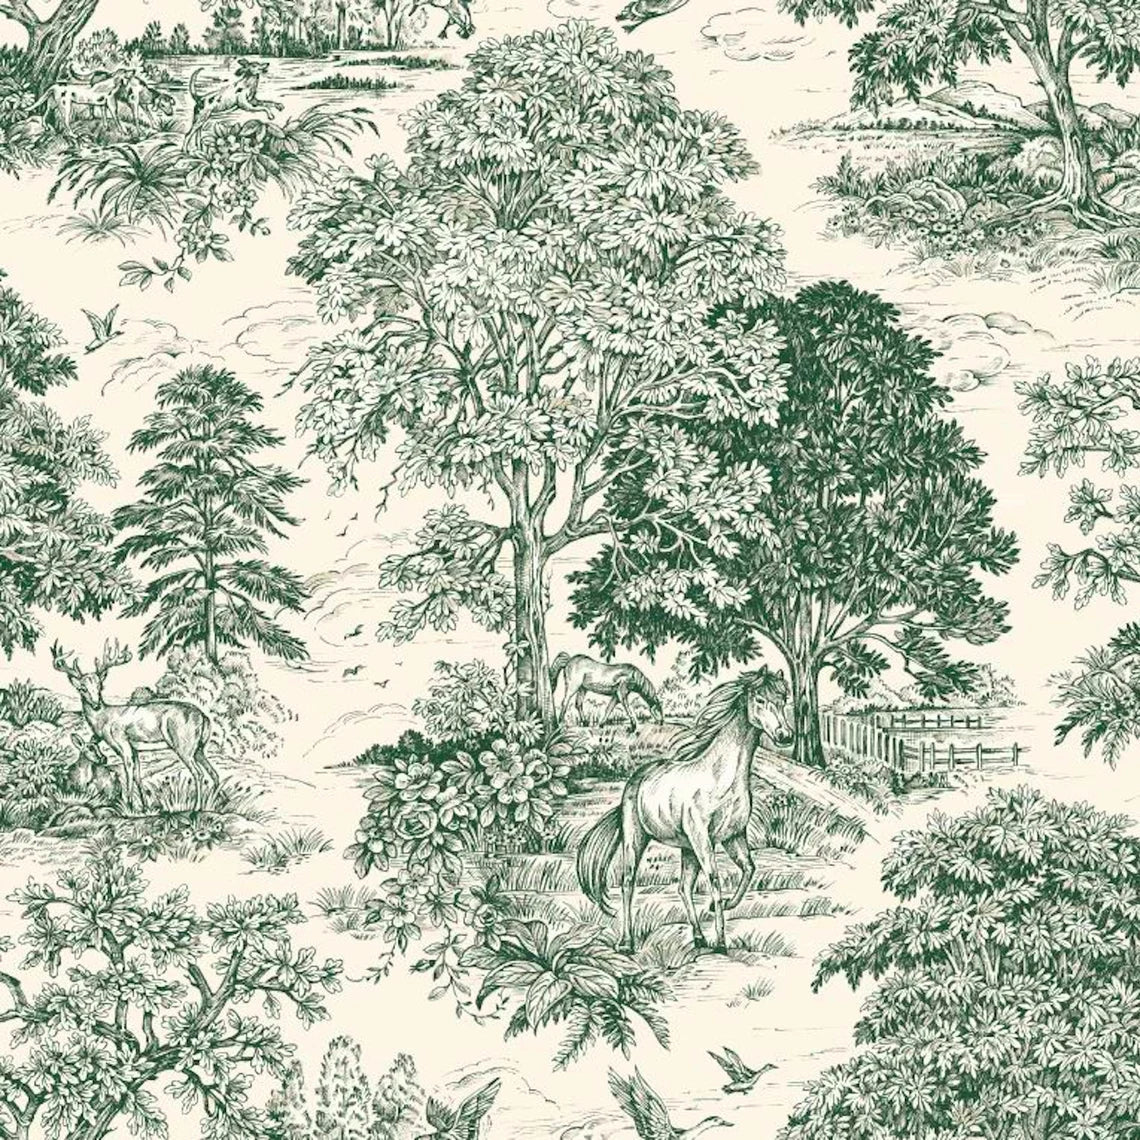 gathered crib skirt in Yellowstone Classic Green Country Toile- Horses, Deer, Dogs- Large Scale